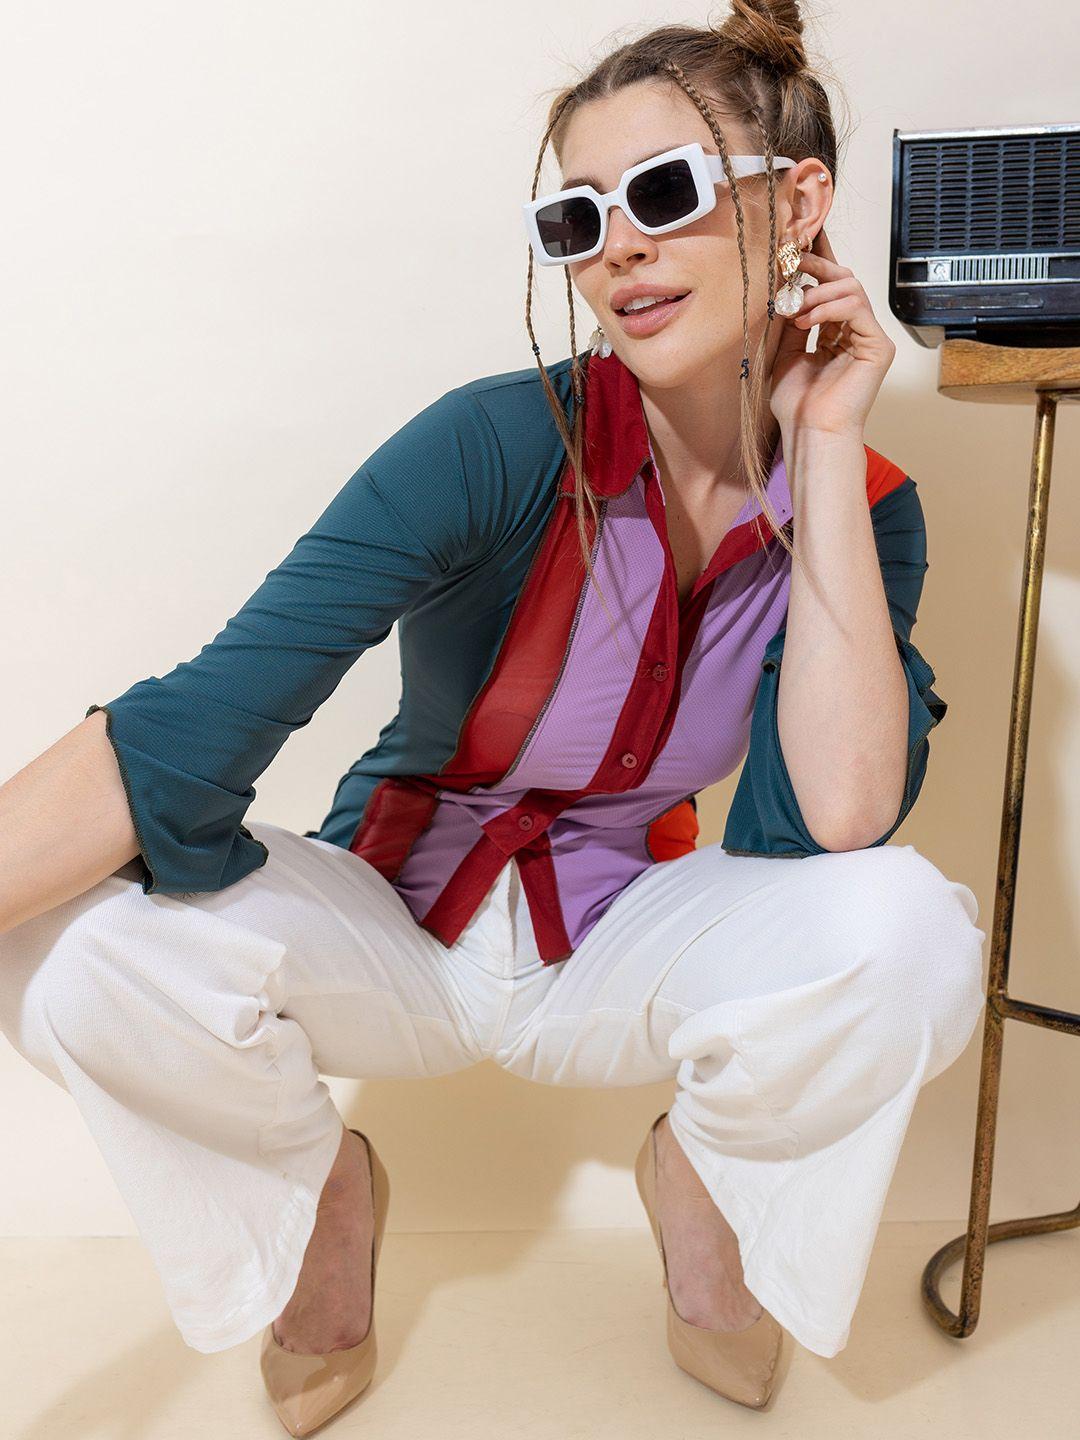 stylecast x hersheinbox relaxed fit multi striped casual shirt with slit sleeves